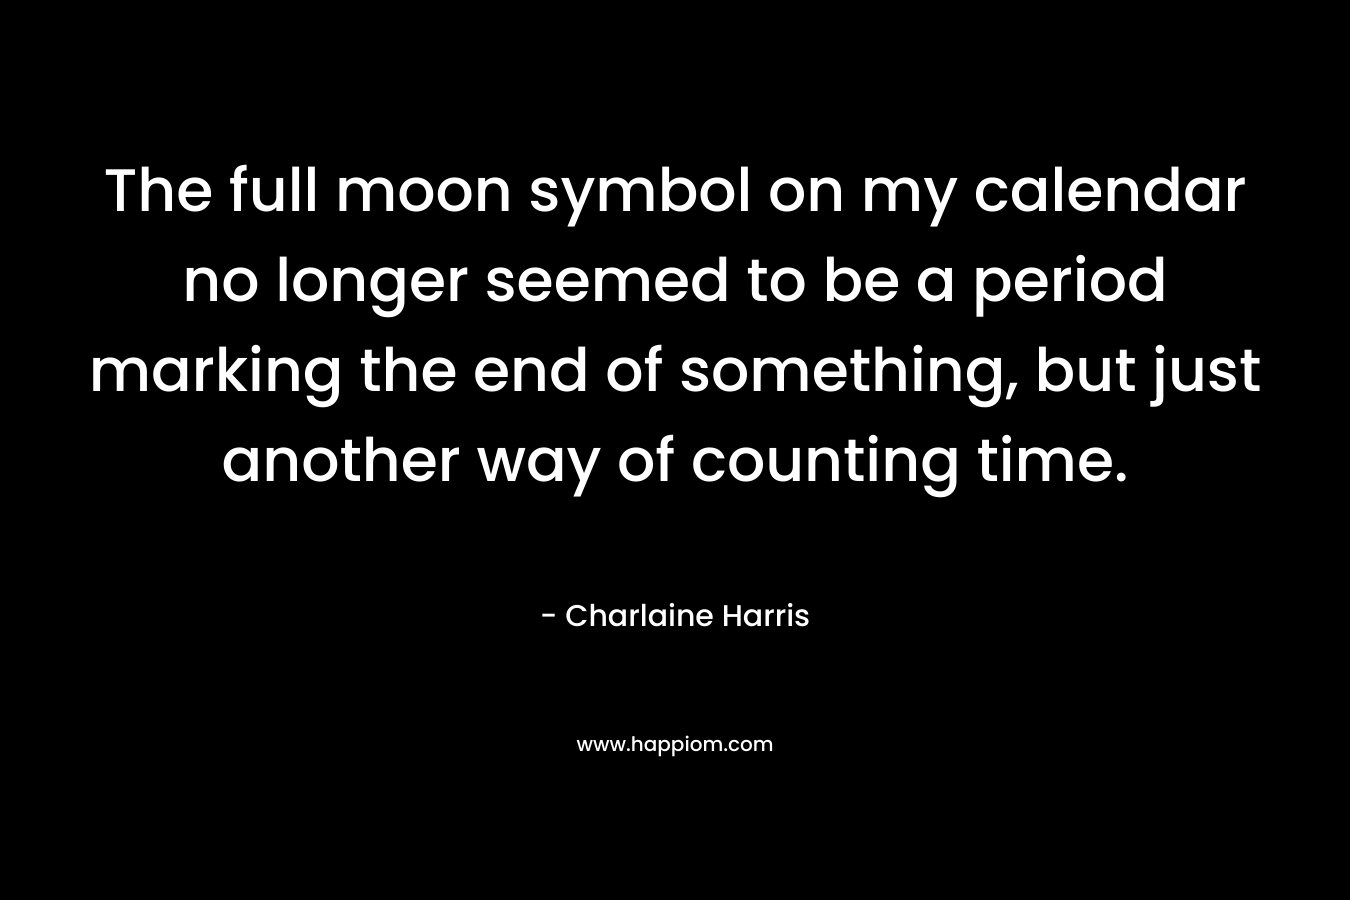 The full moon symbol on my calendar no longer seemed to be a period marking the end of something, but just another way of counting time.